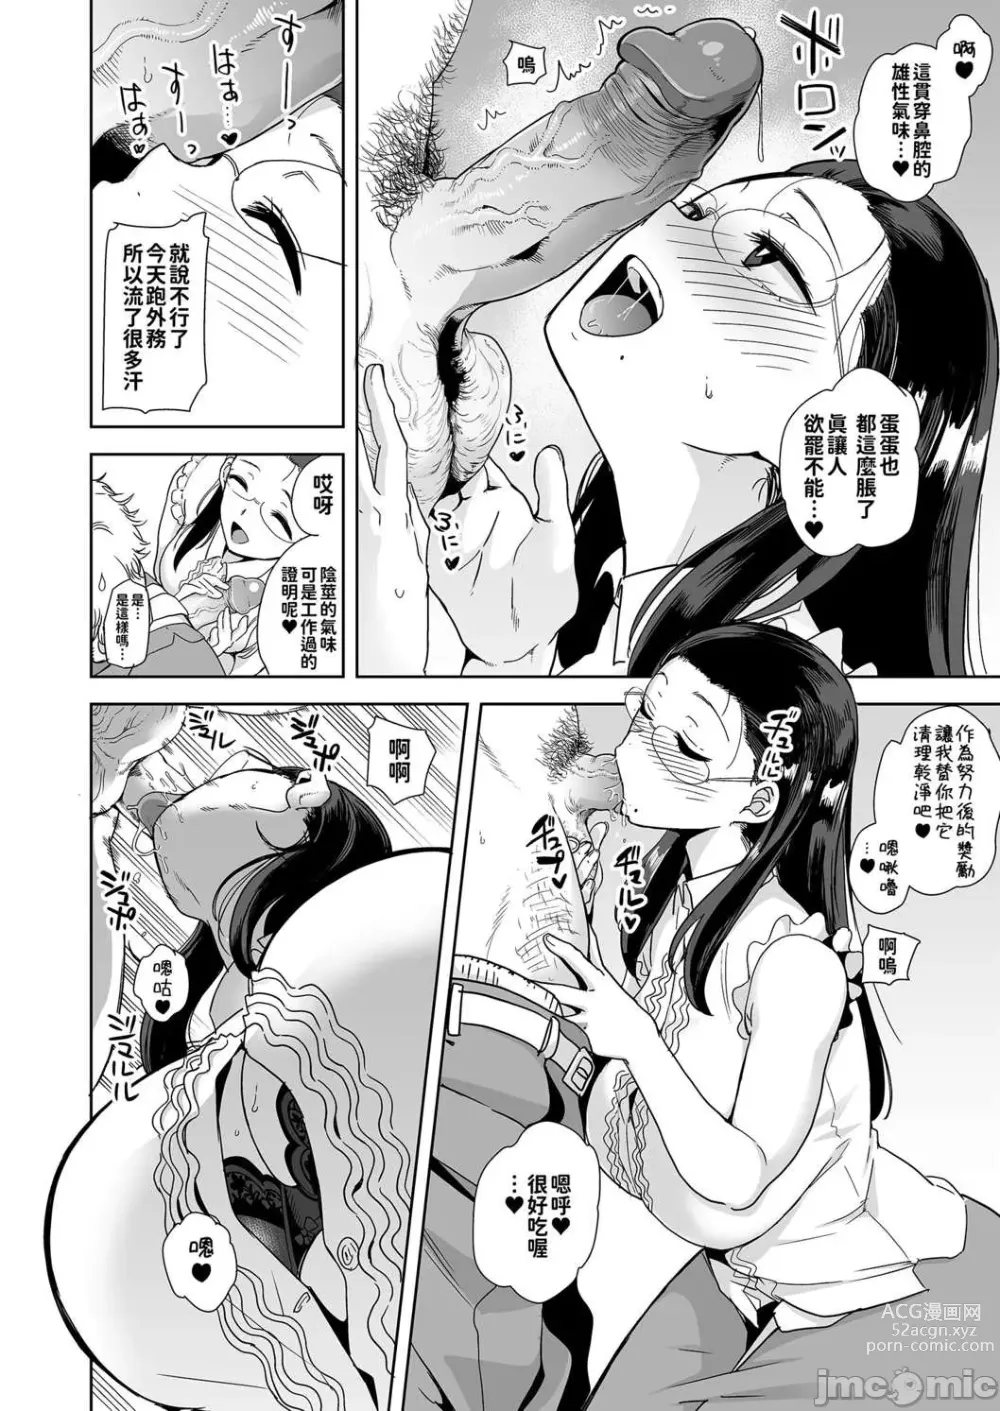 Page 9 of doujinshi 聖華女学院高等部公認竿おじさん 1-6